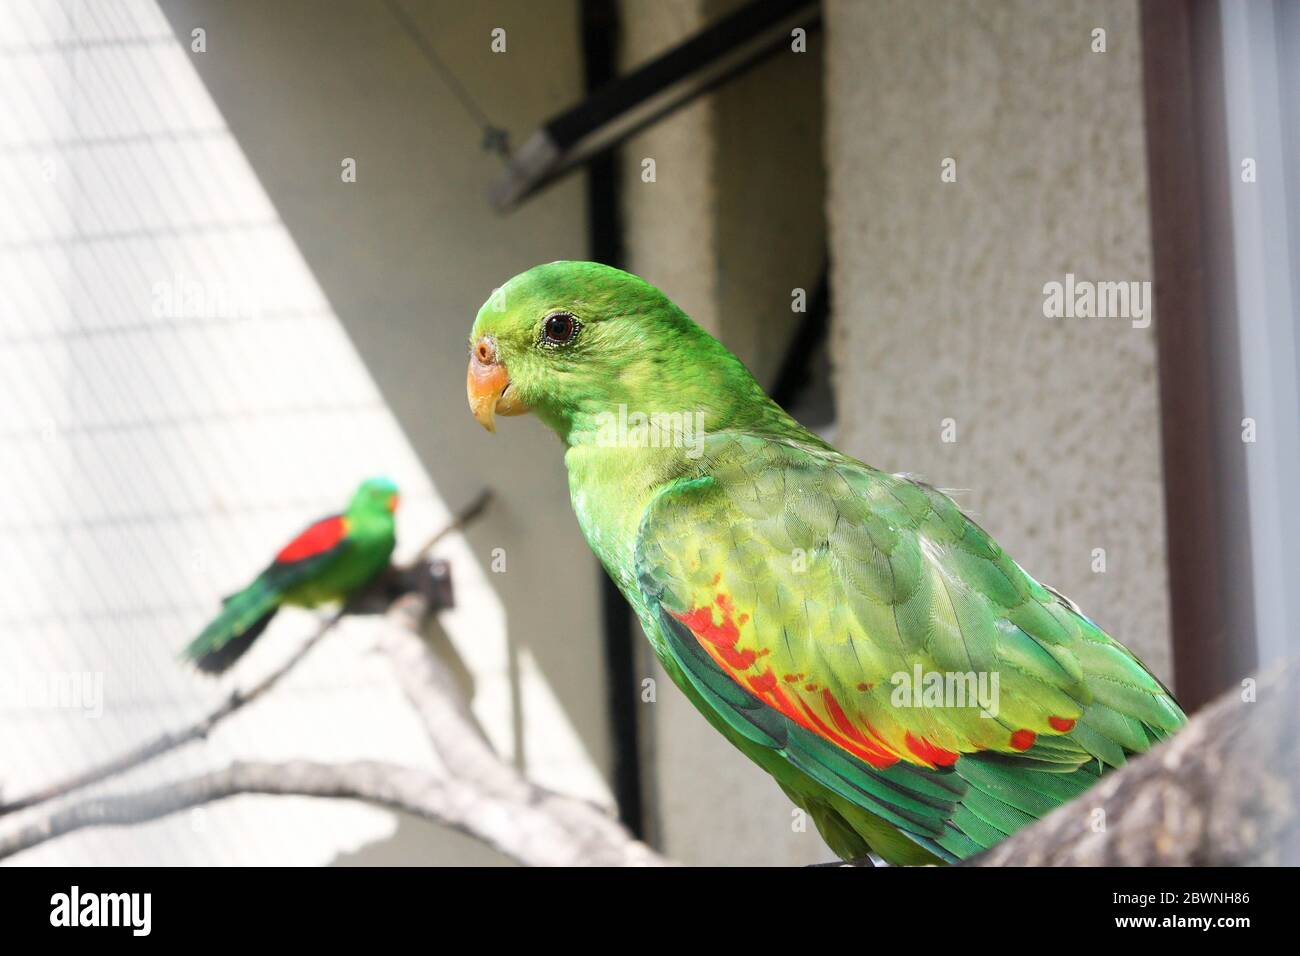 A beautiful parrot with bright green plumage sits on a branch. side view Stock Photo